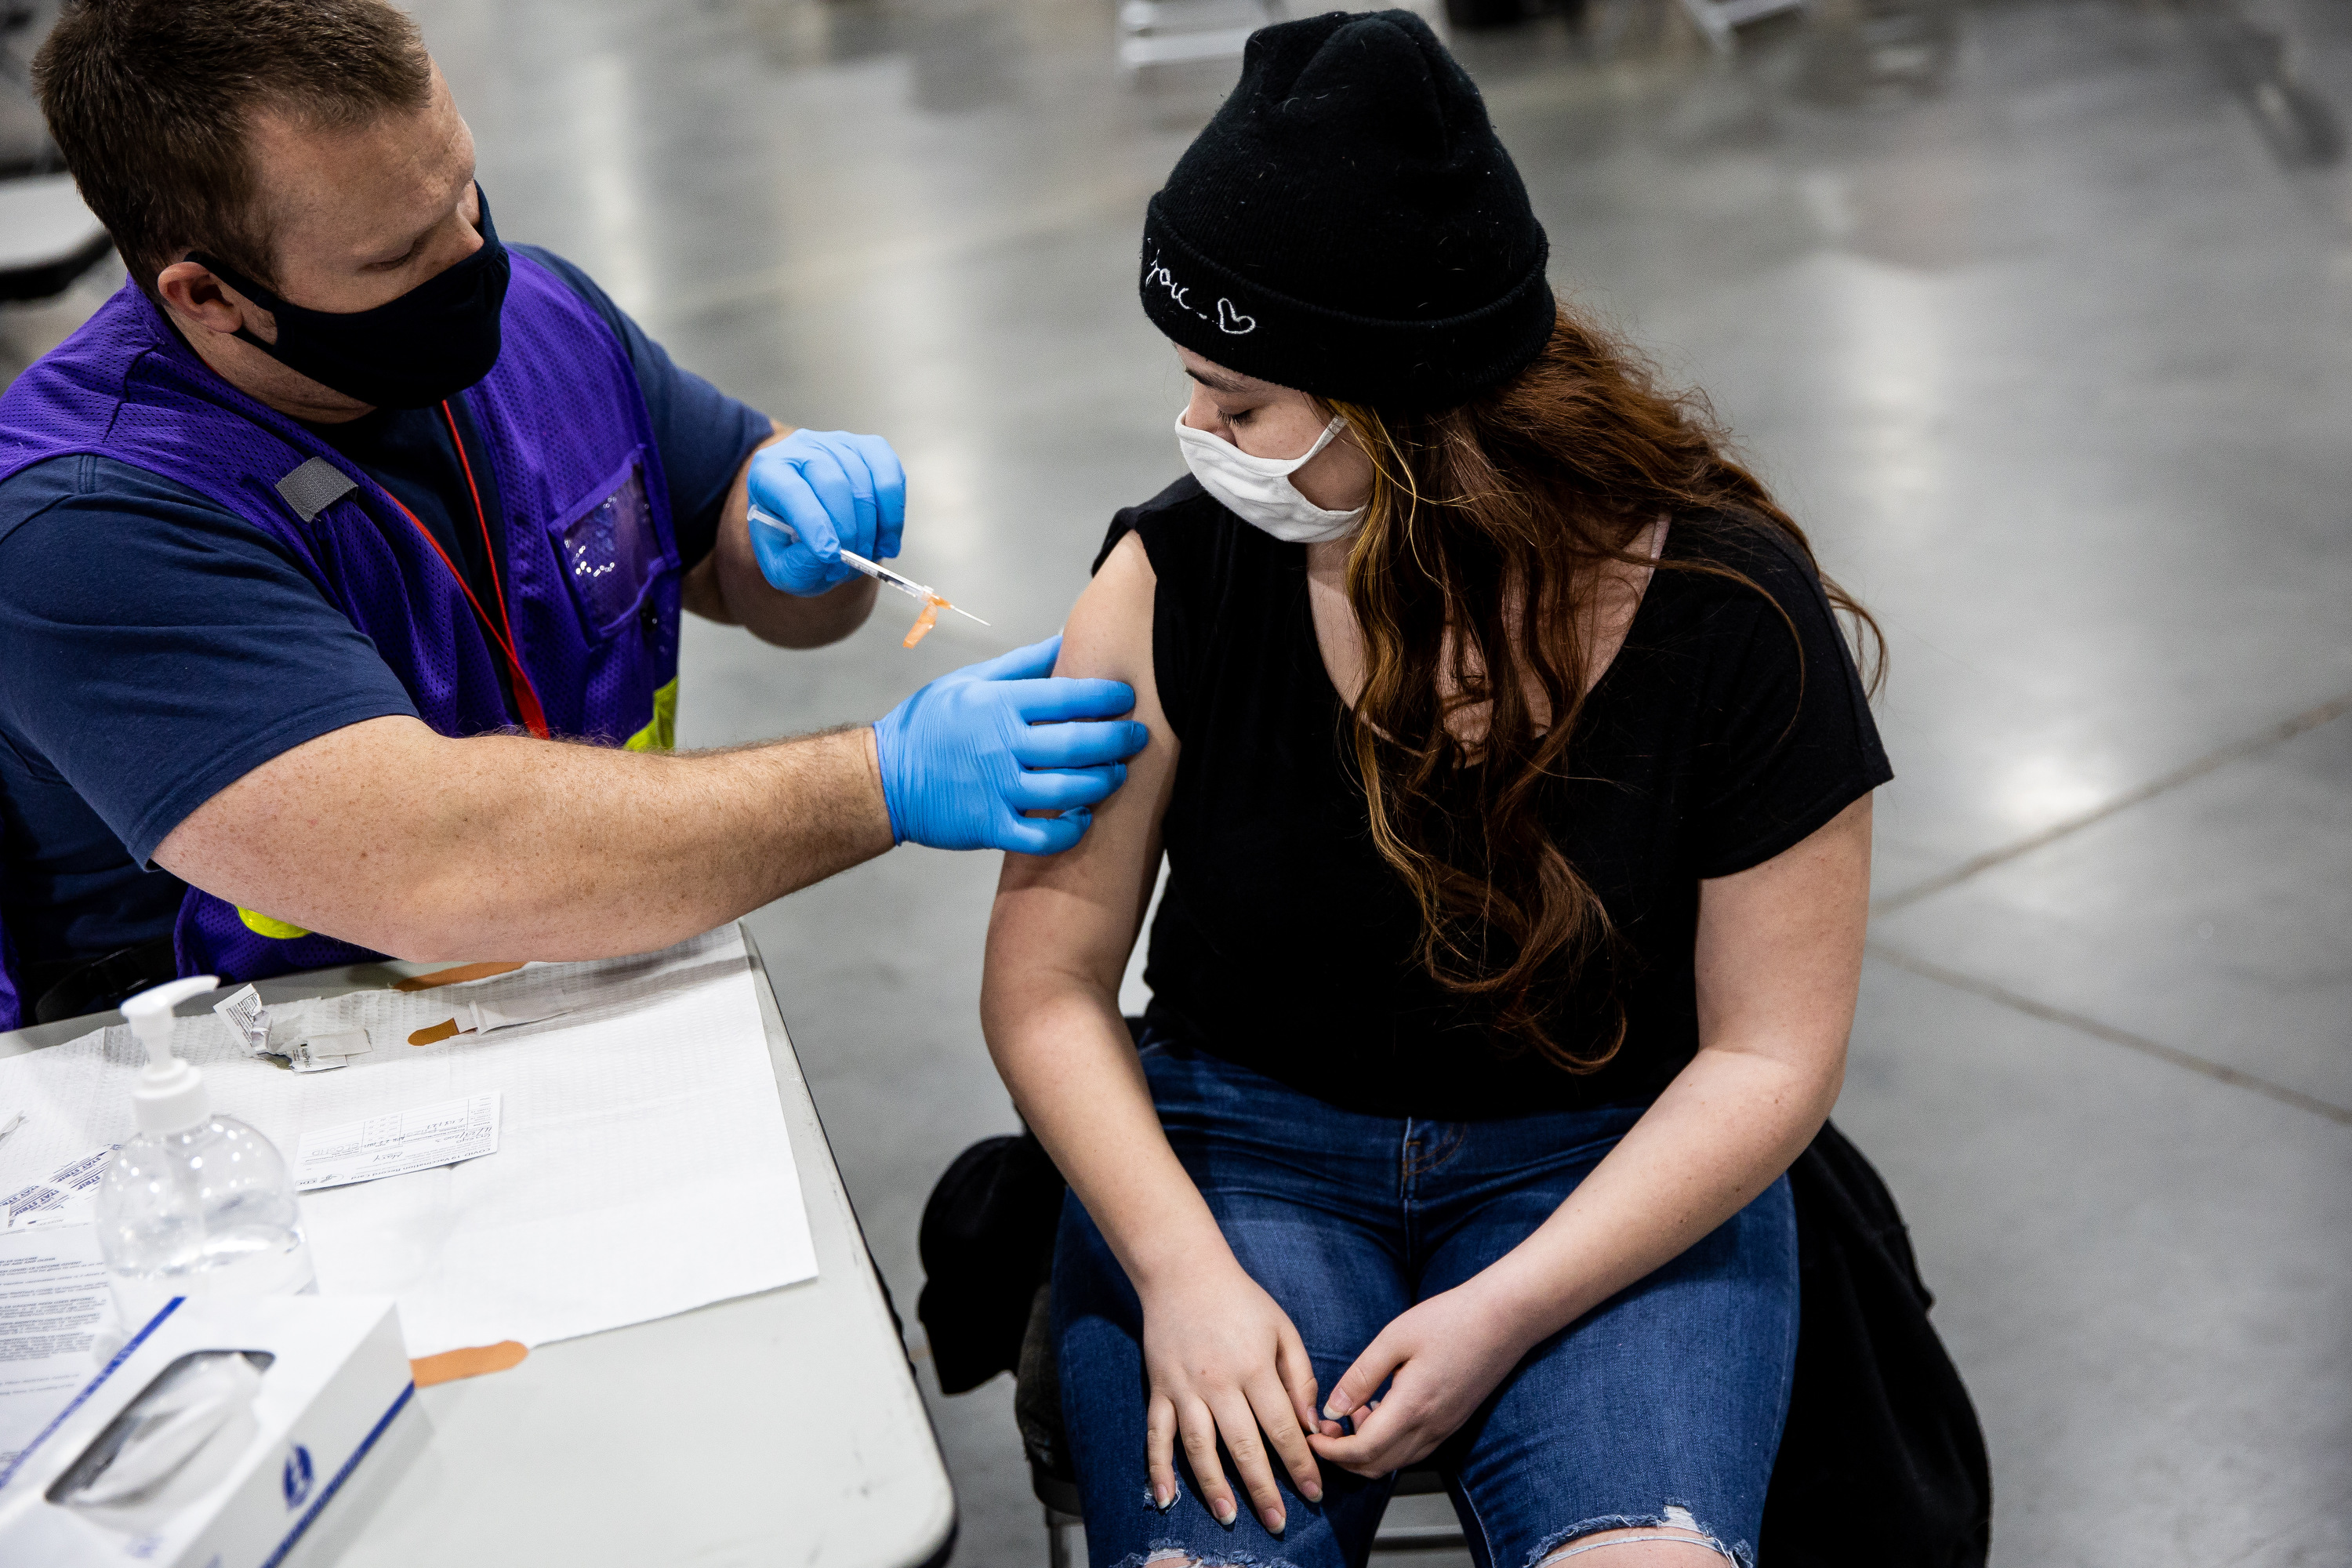 20,000 new vaccine appointments available in Salt Lake County